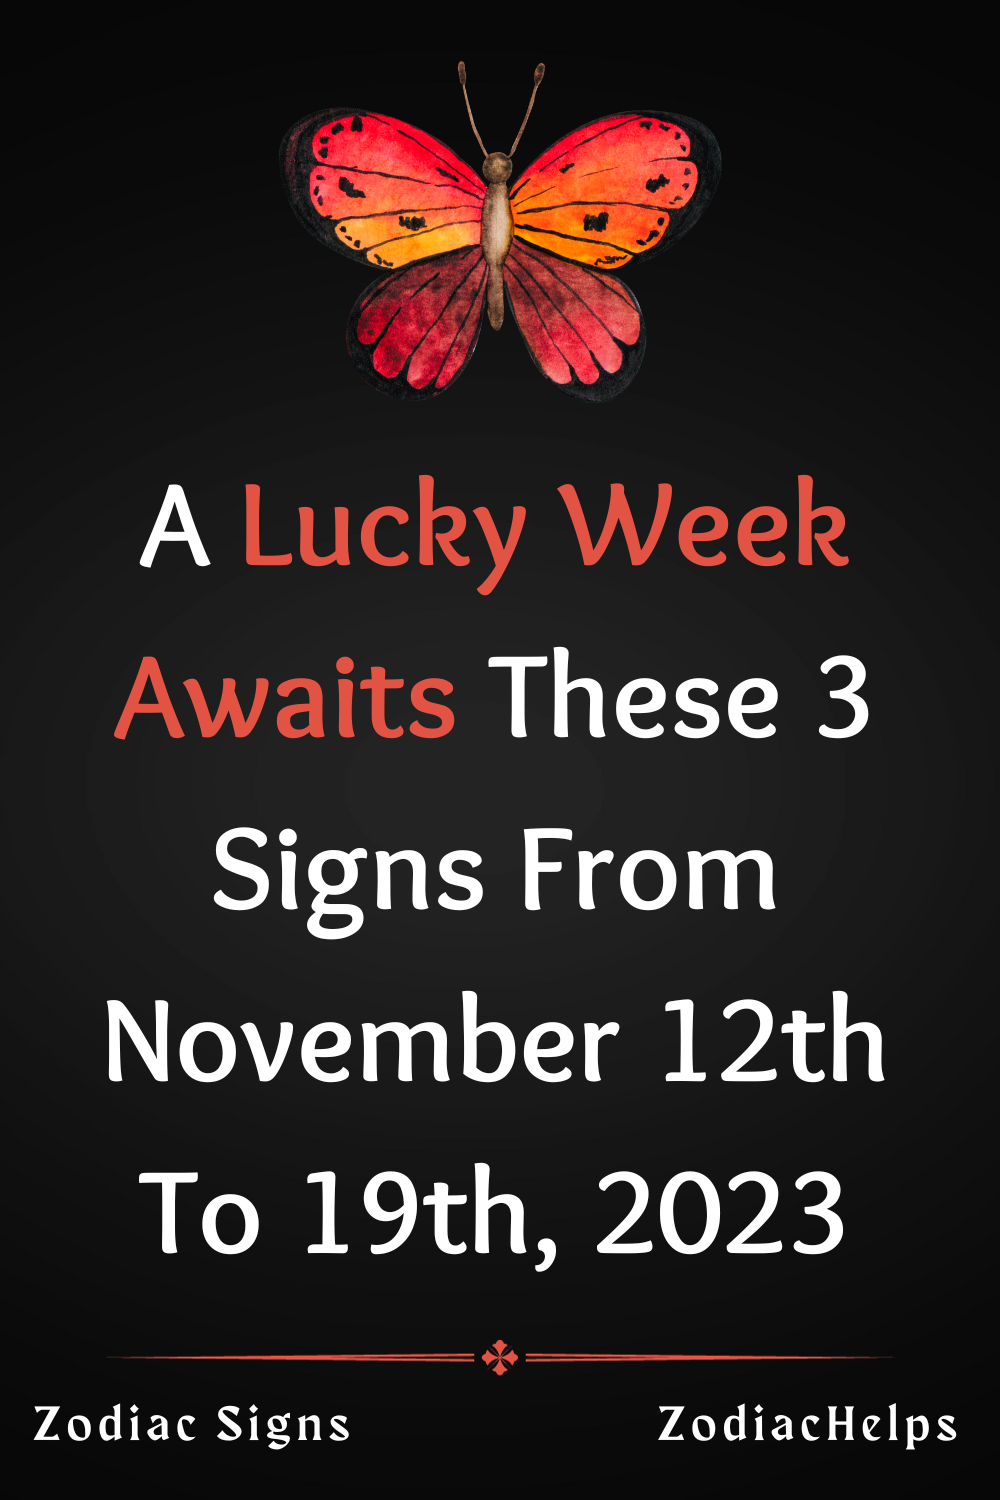 A Lucky Week Awaits These 3 Signs From November 12th To 19th, 2023